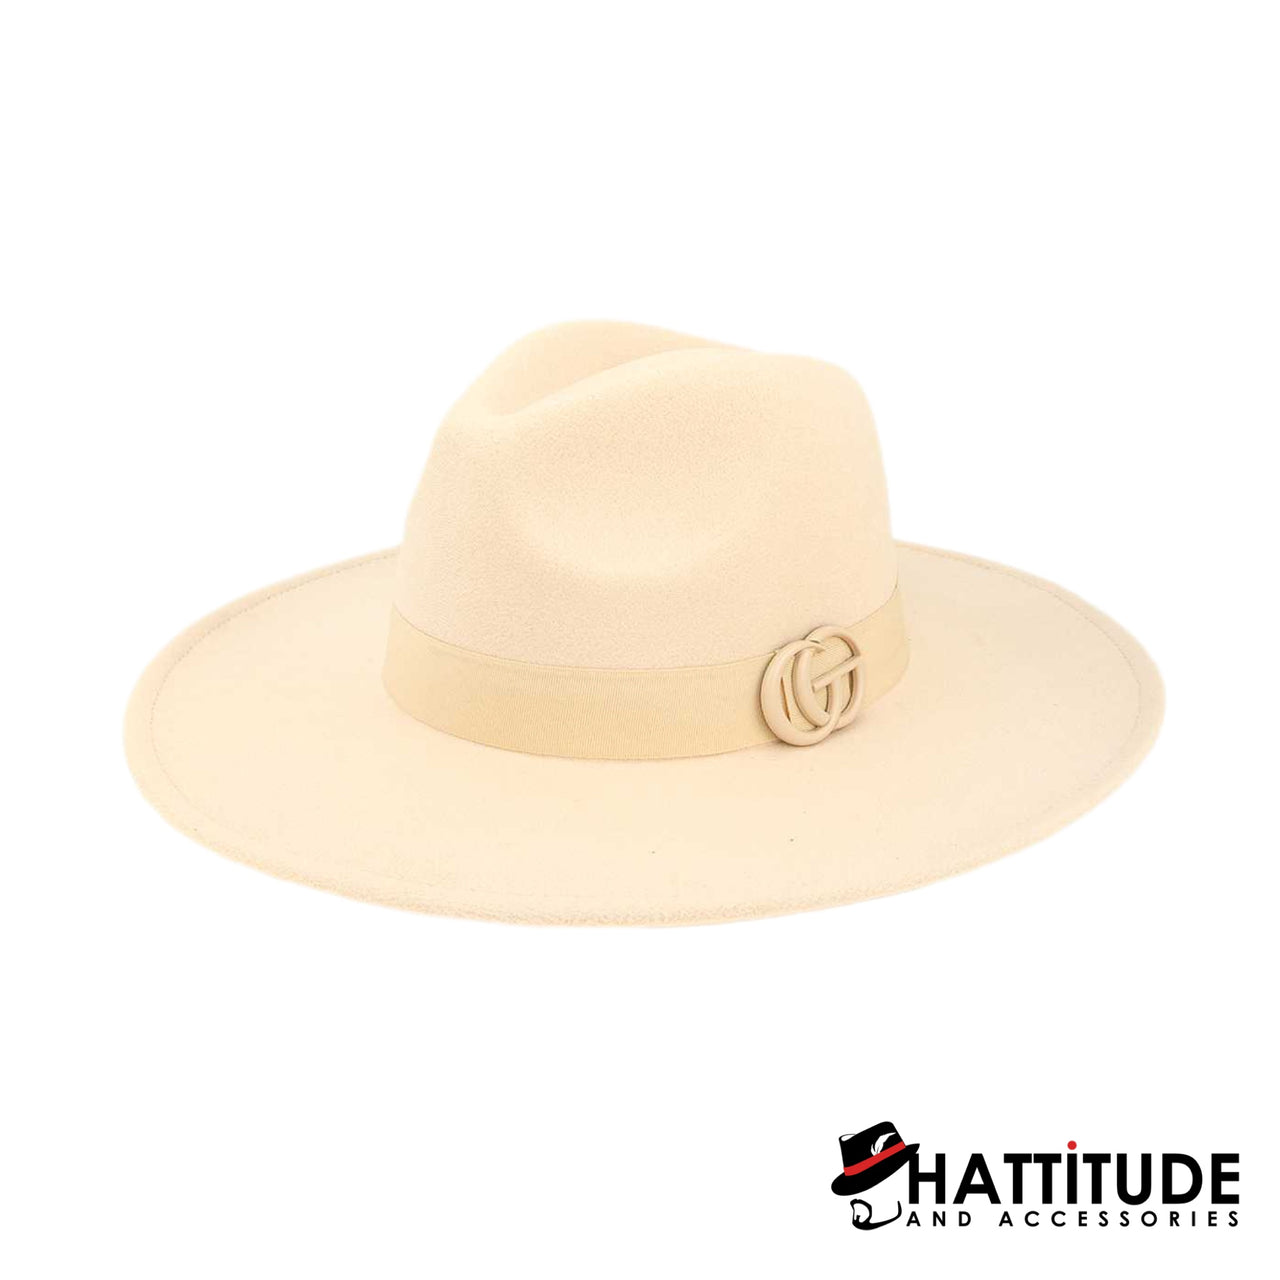 GC 'Limited Collection' - Beige - Hattitude